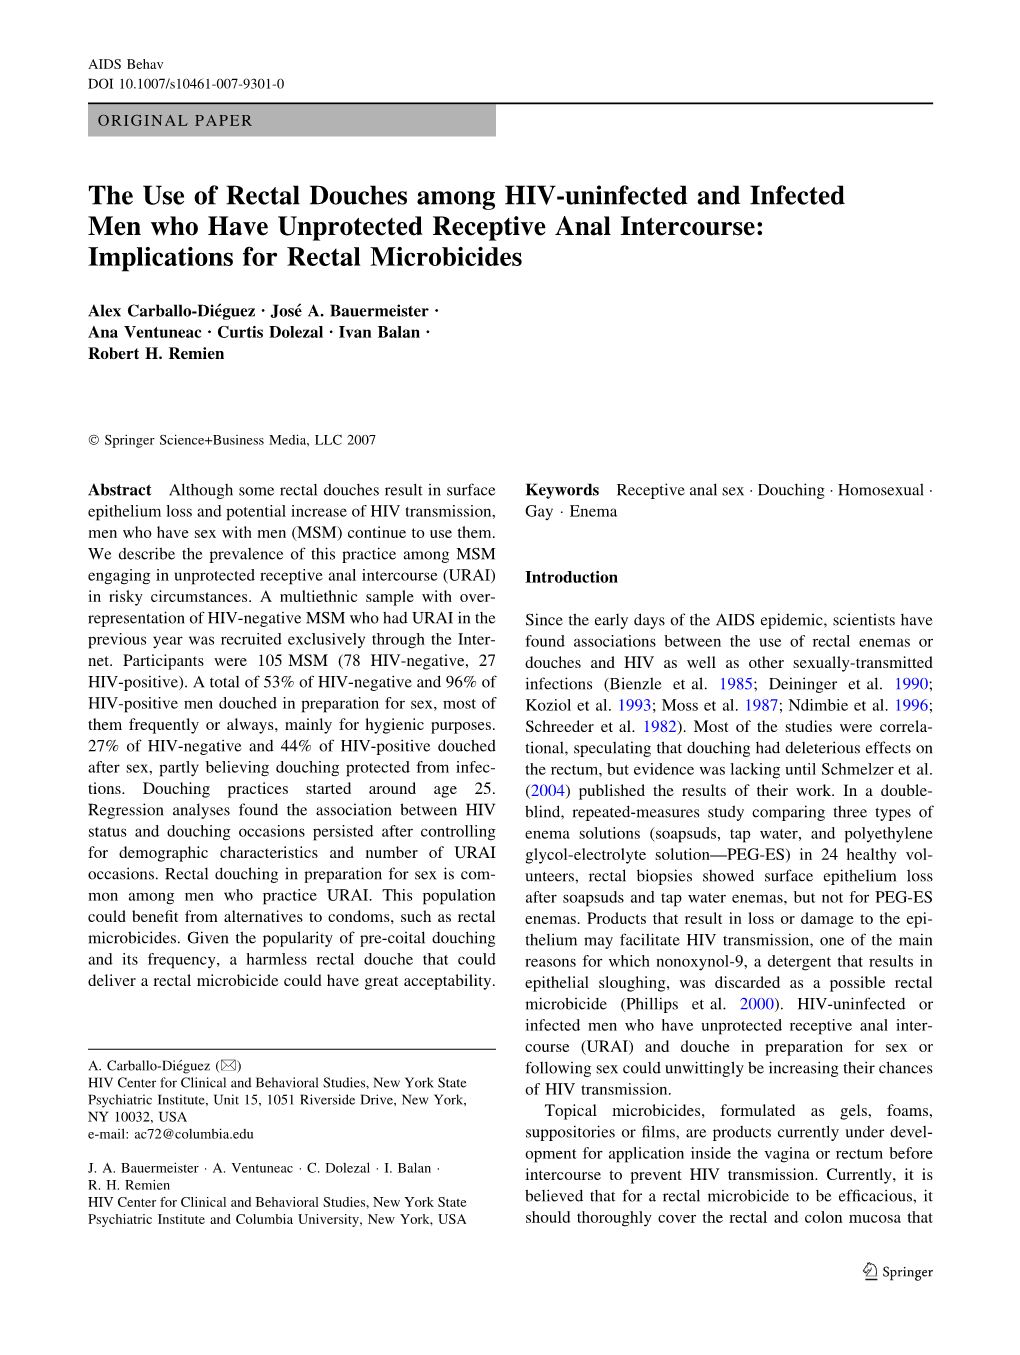 The Use of Rectal Douches Among HIV-Uninfected and Infected Men Who Have Unprotected Receptive Anal Intercourse: Implications for Rectal Microbicides